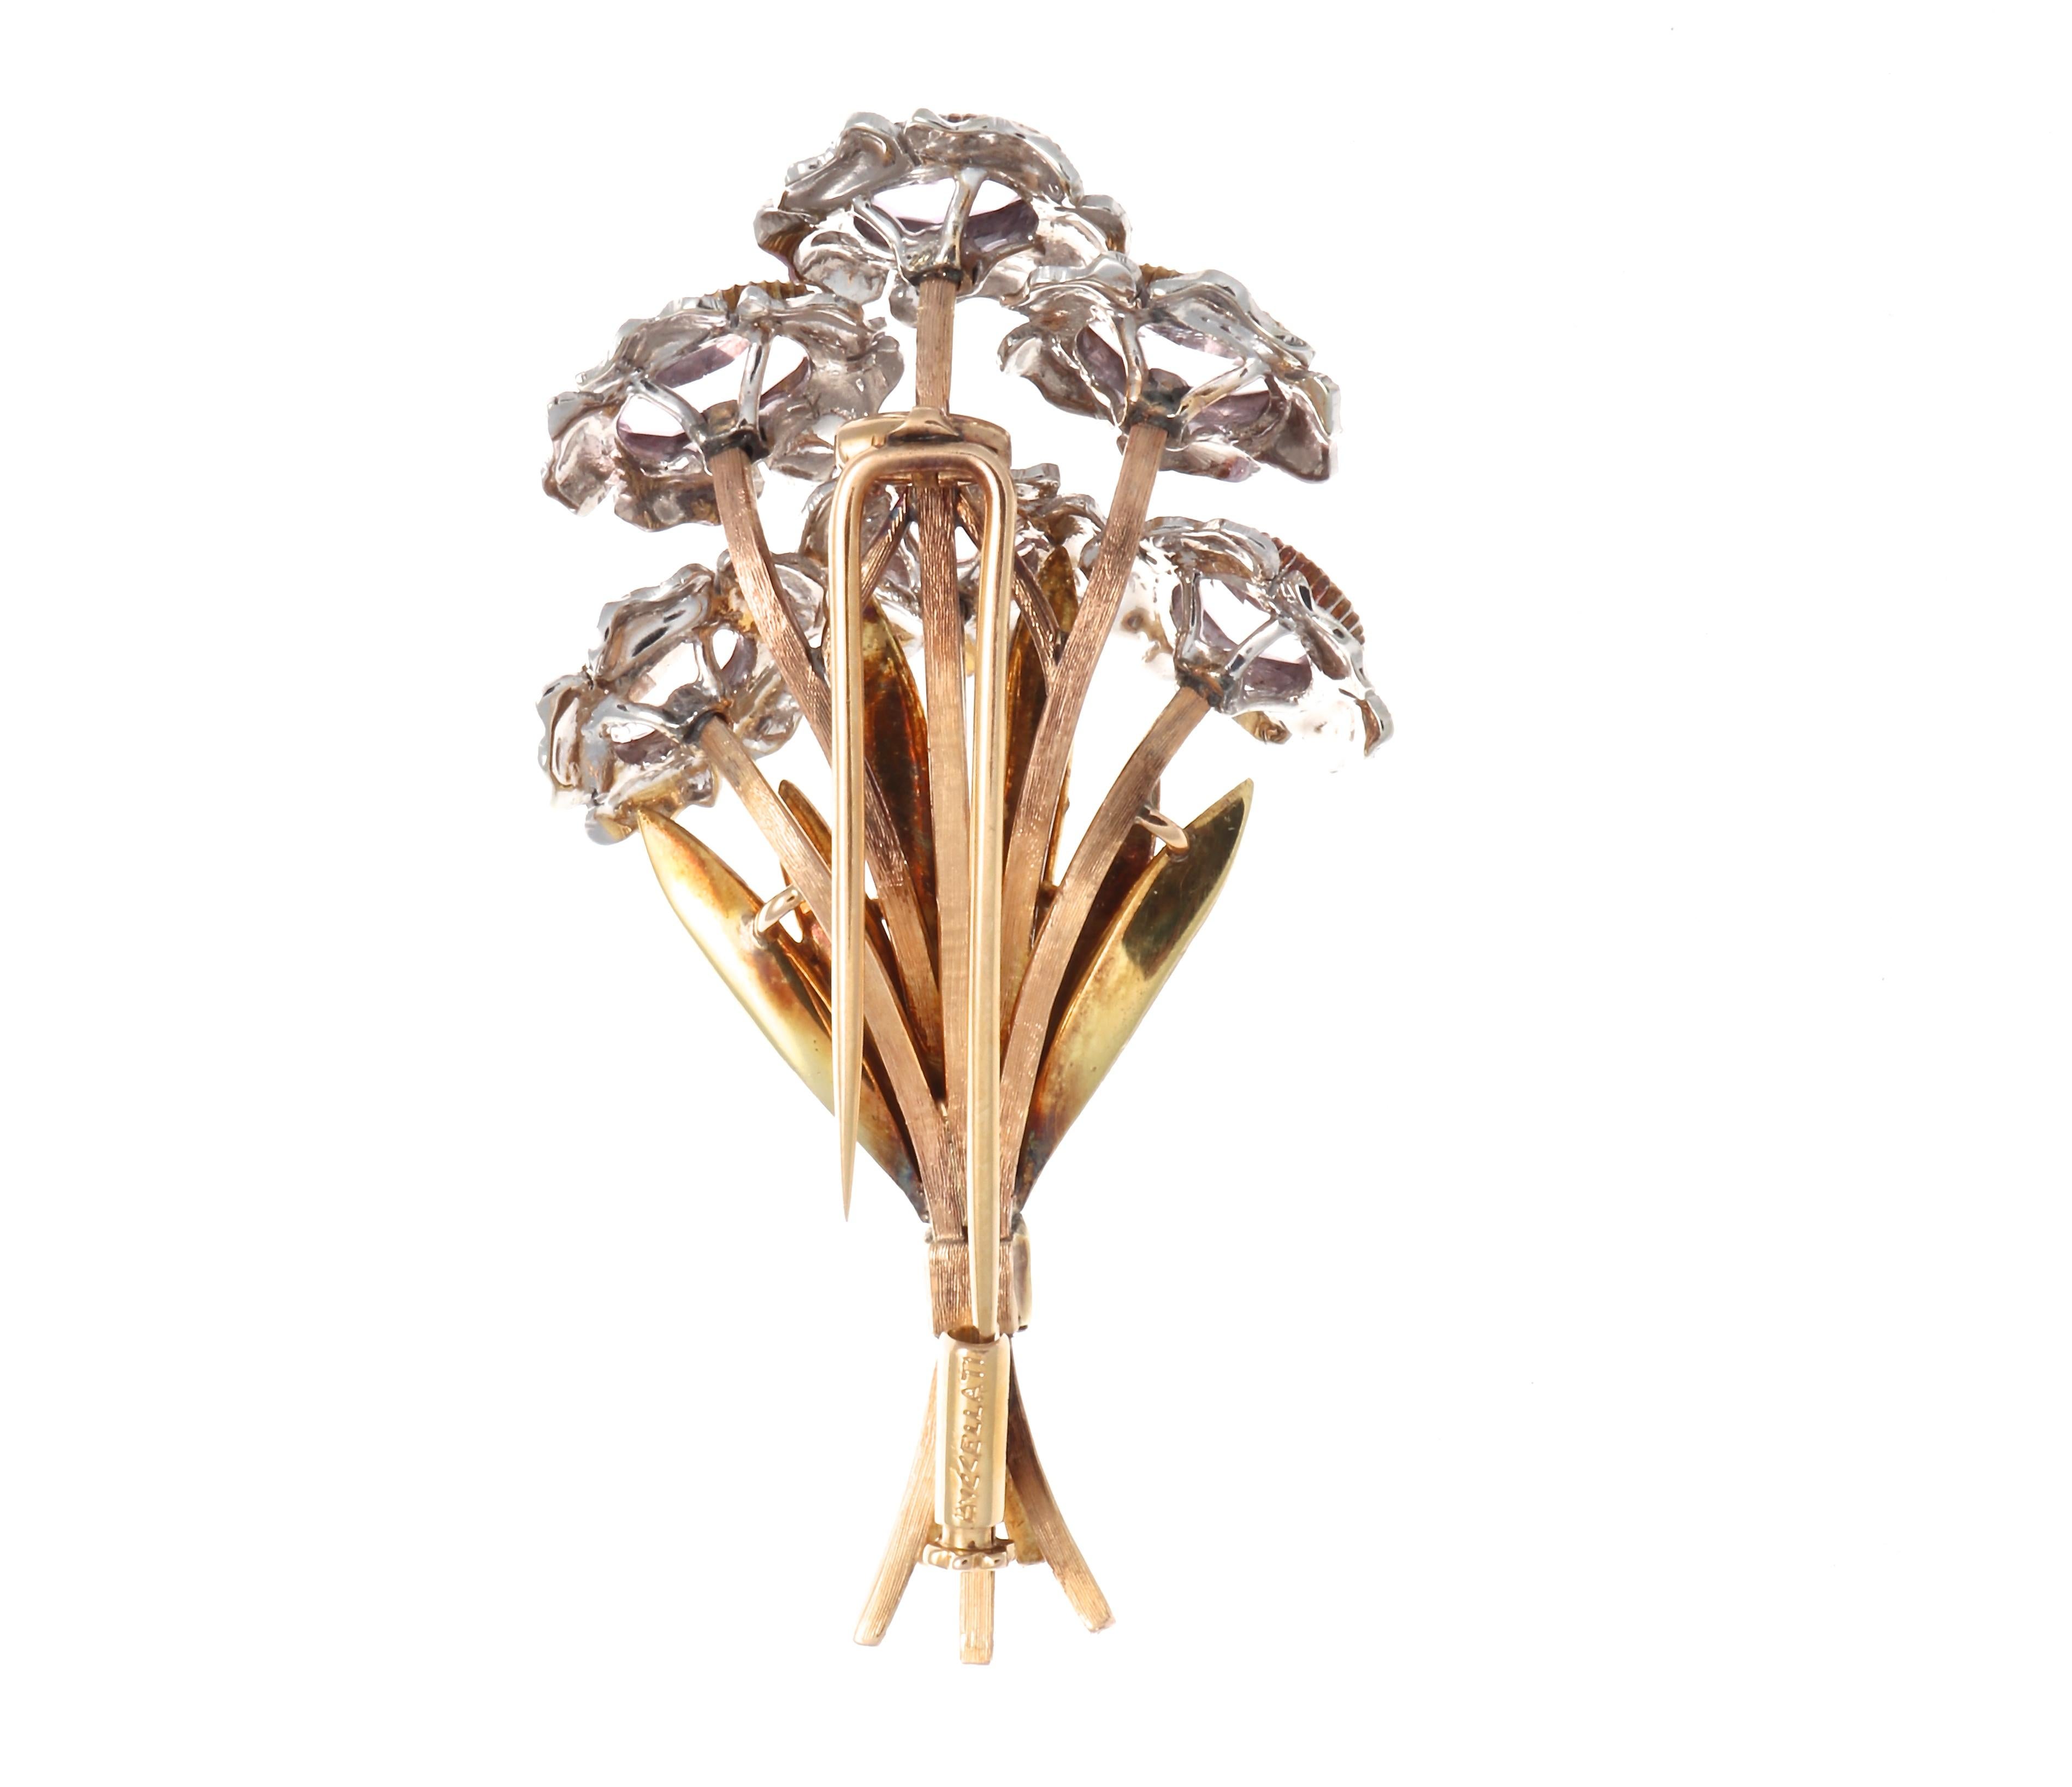 Buccellati is one of the brands known for its textural gold jewelry. As one of the oldest Italian jewelry brands operating from the 1920s to the 1960s, their pieces are bold and instantly recognizable. Featuring a bouquet of flowers that are